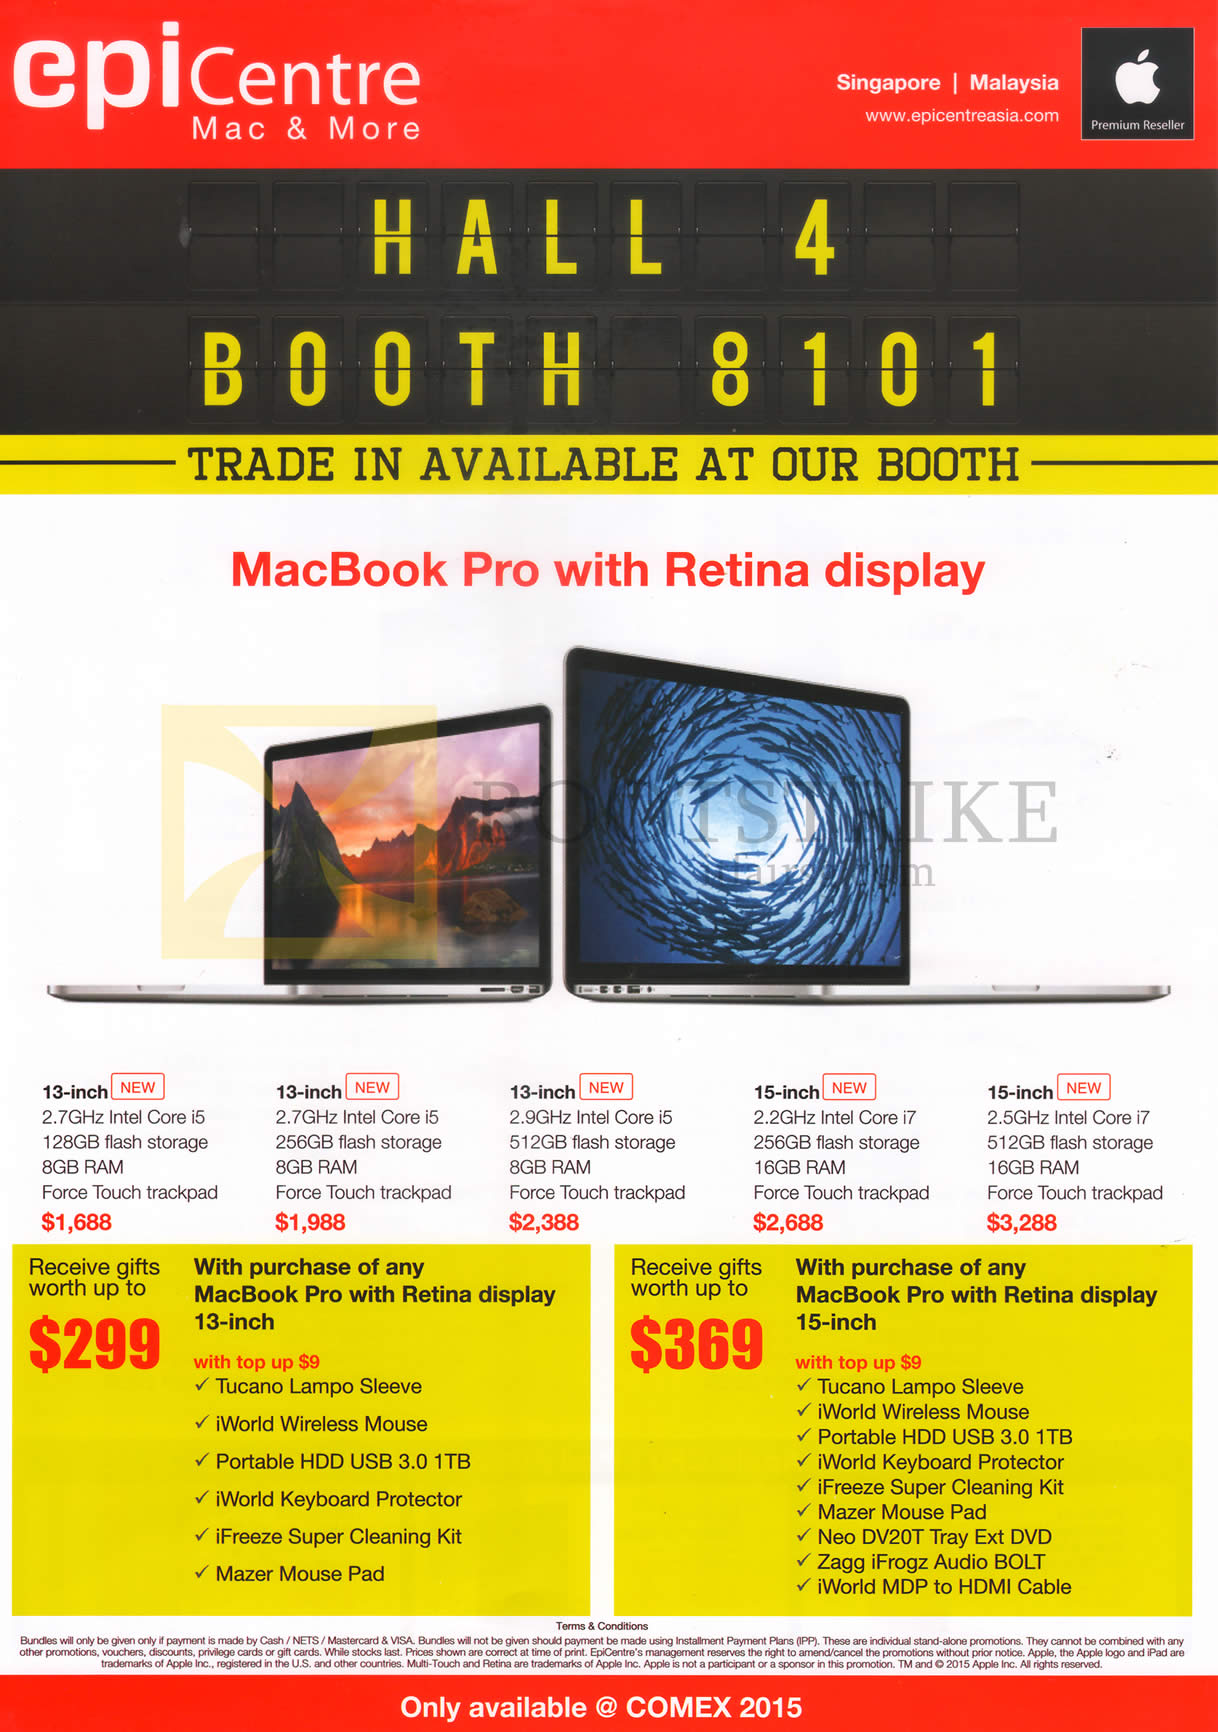 COMEX 2015 price list image brochure of EpiCentre Apple MacBook Pro With Retina Display 13 Inch, 15 Inch